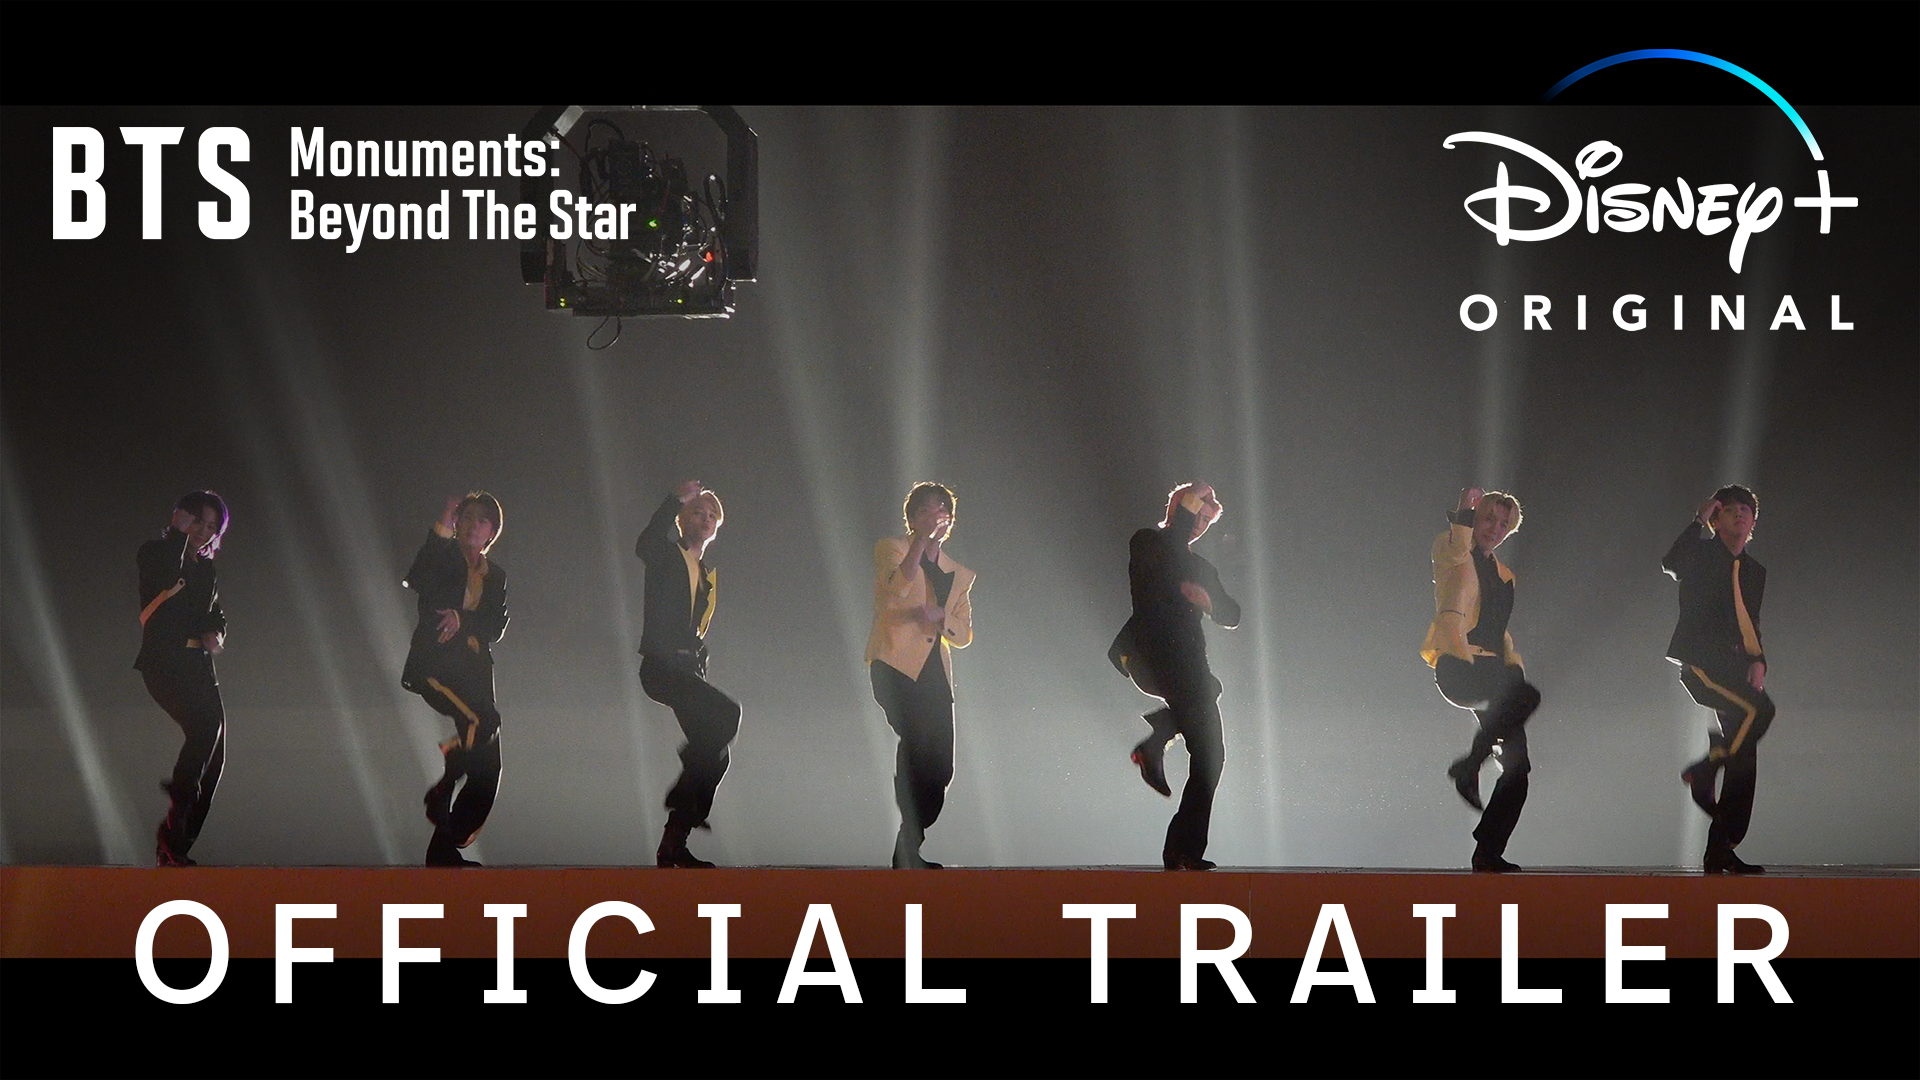 BTS Monuments: Beyond The Star | Special Trailer | Disney+